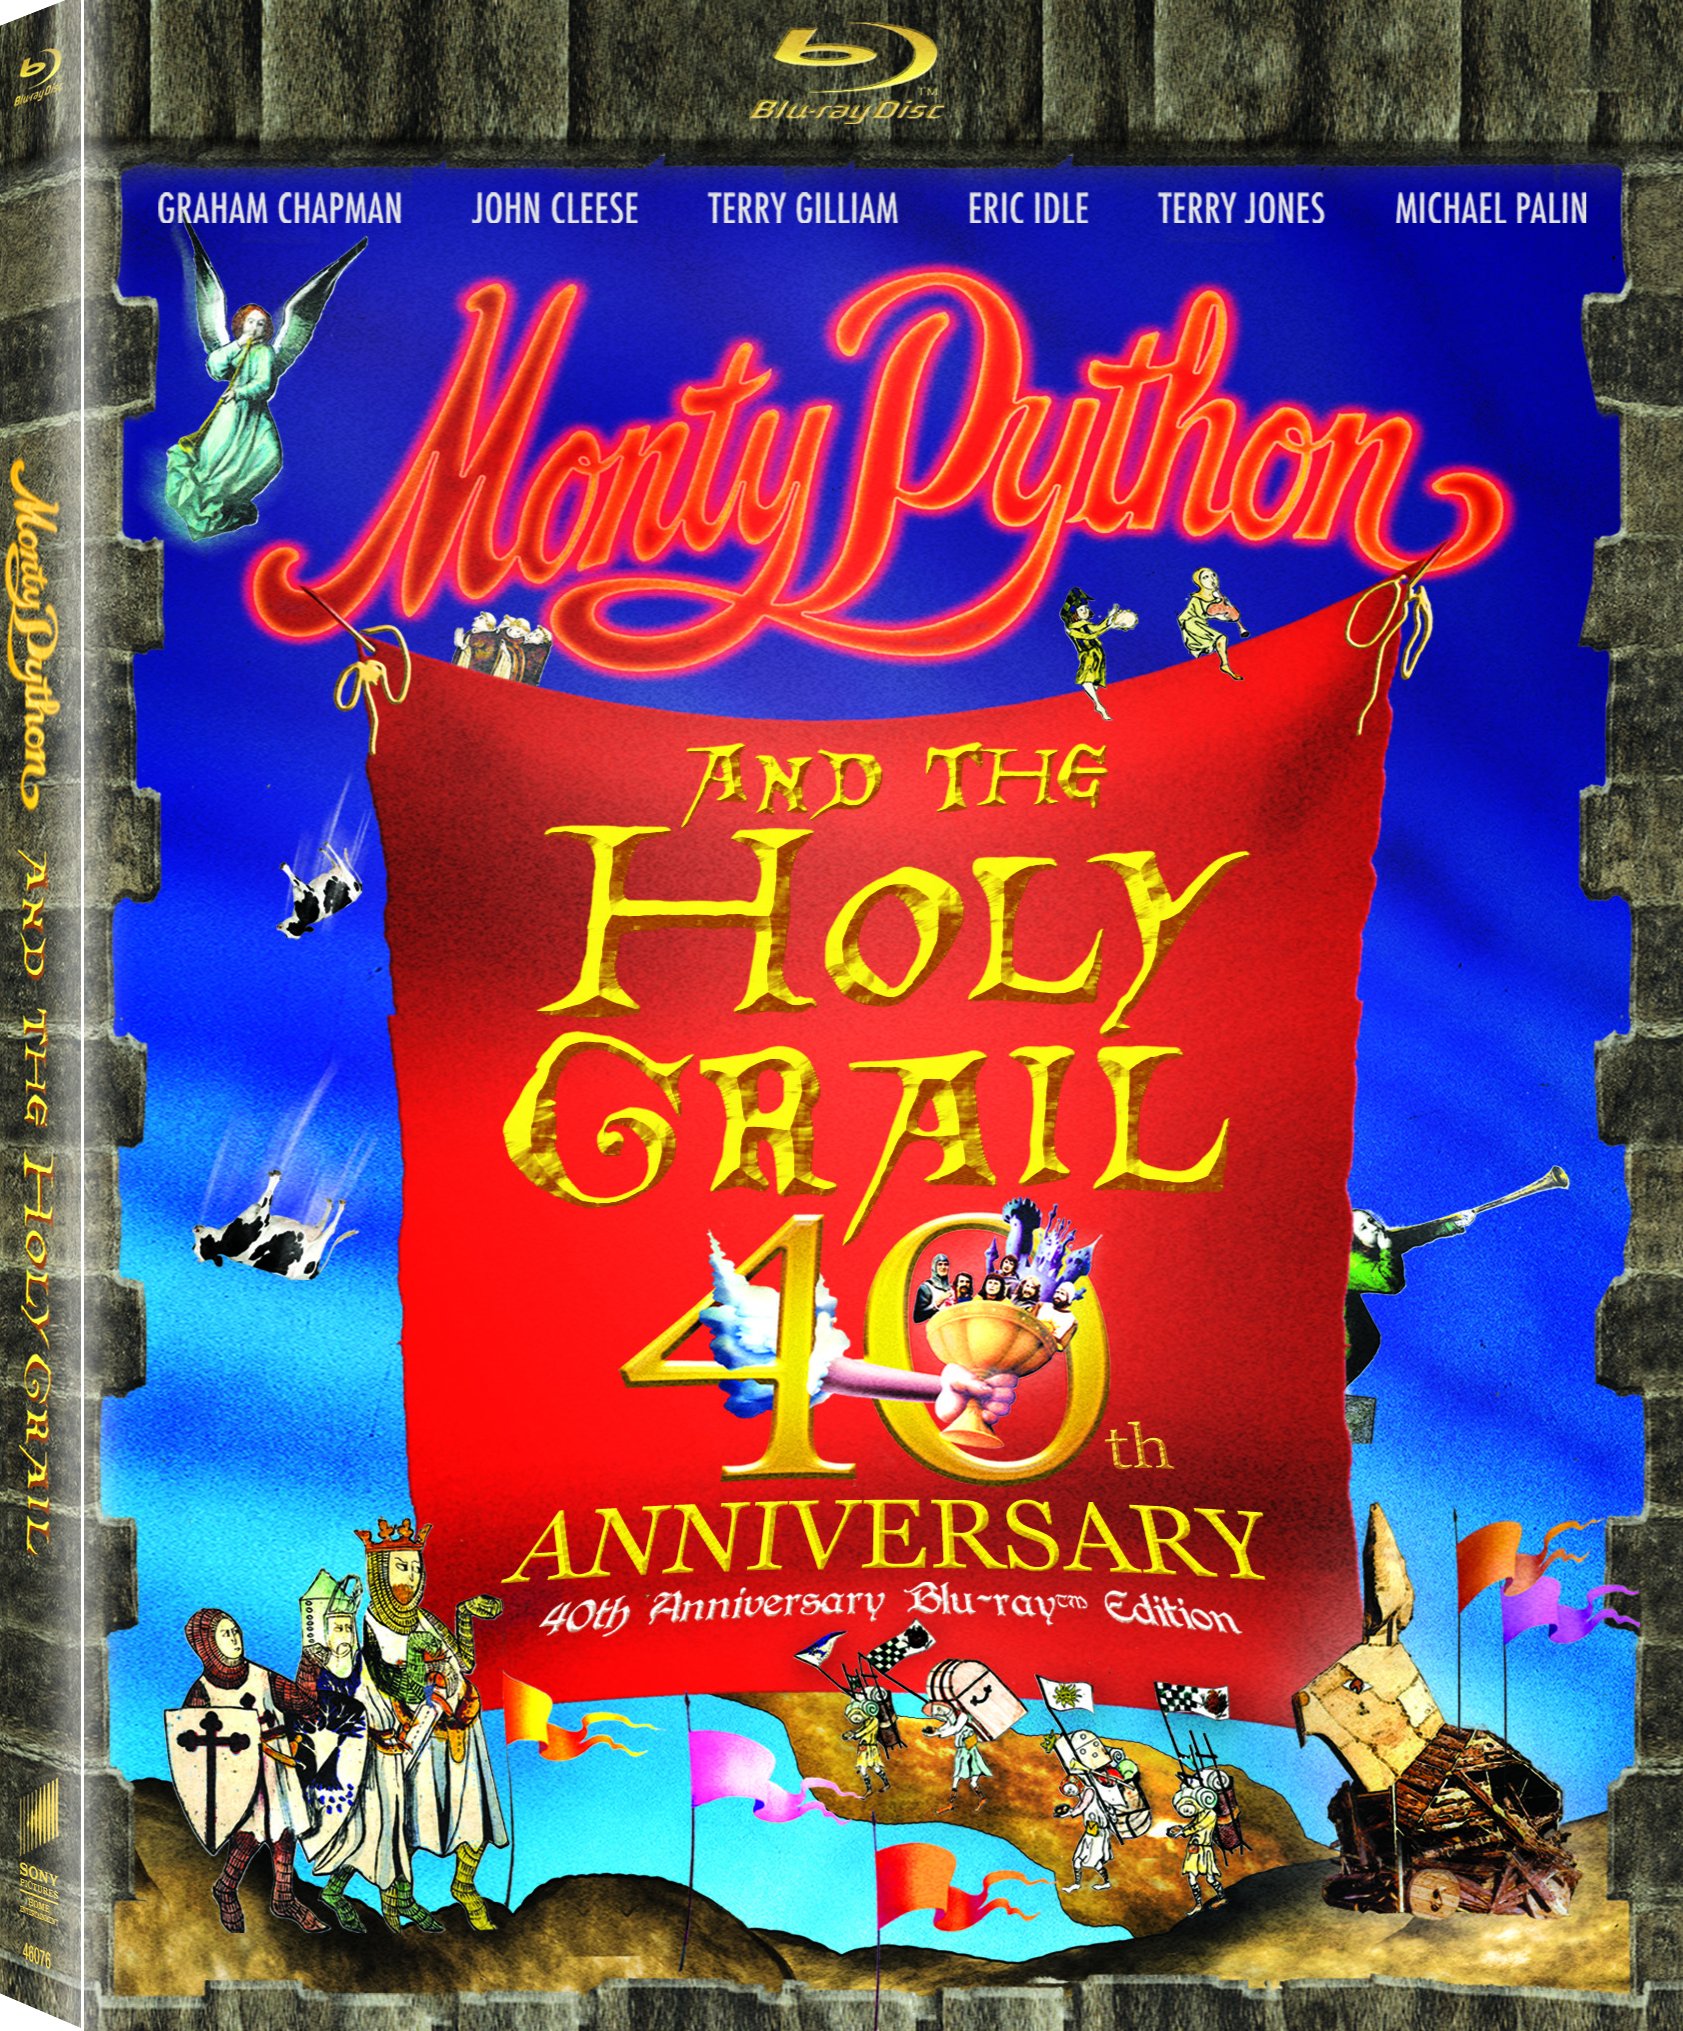 Monty Python and the Holy Grail DVD Release Date